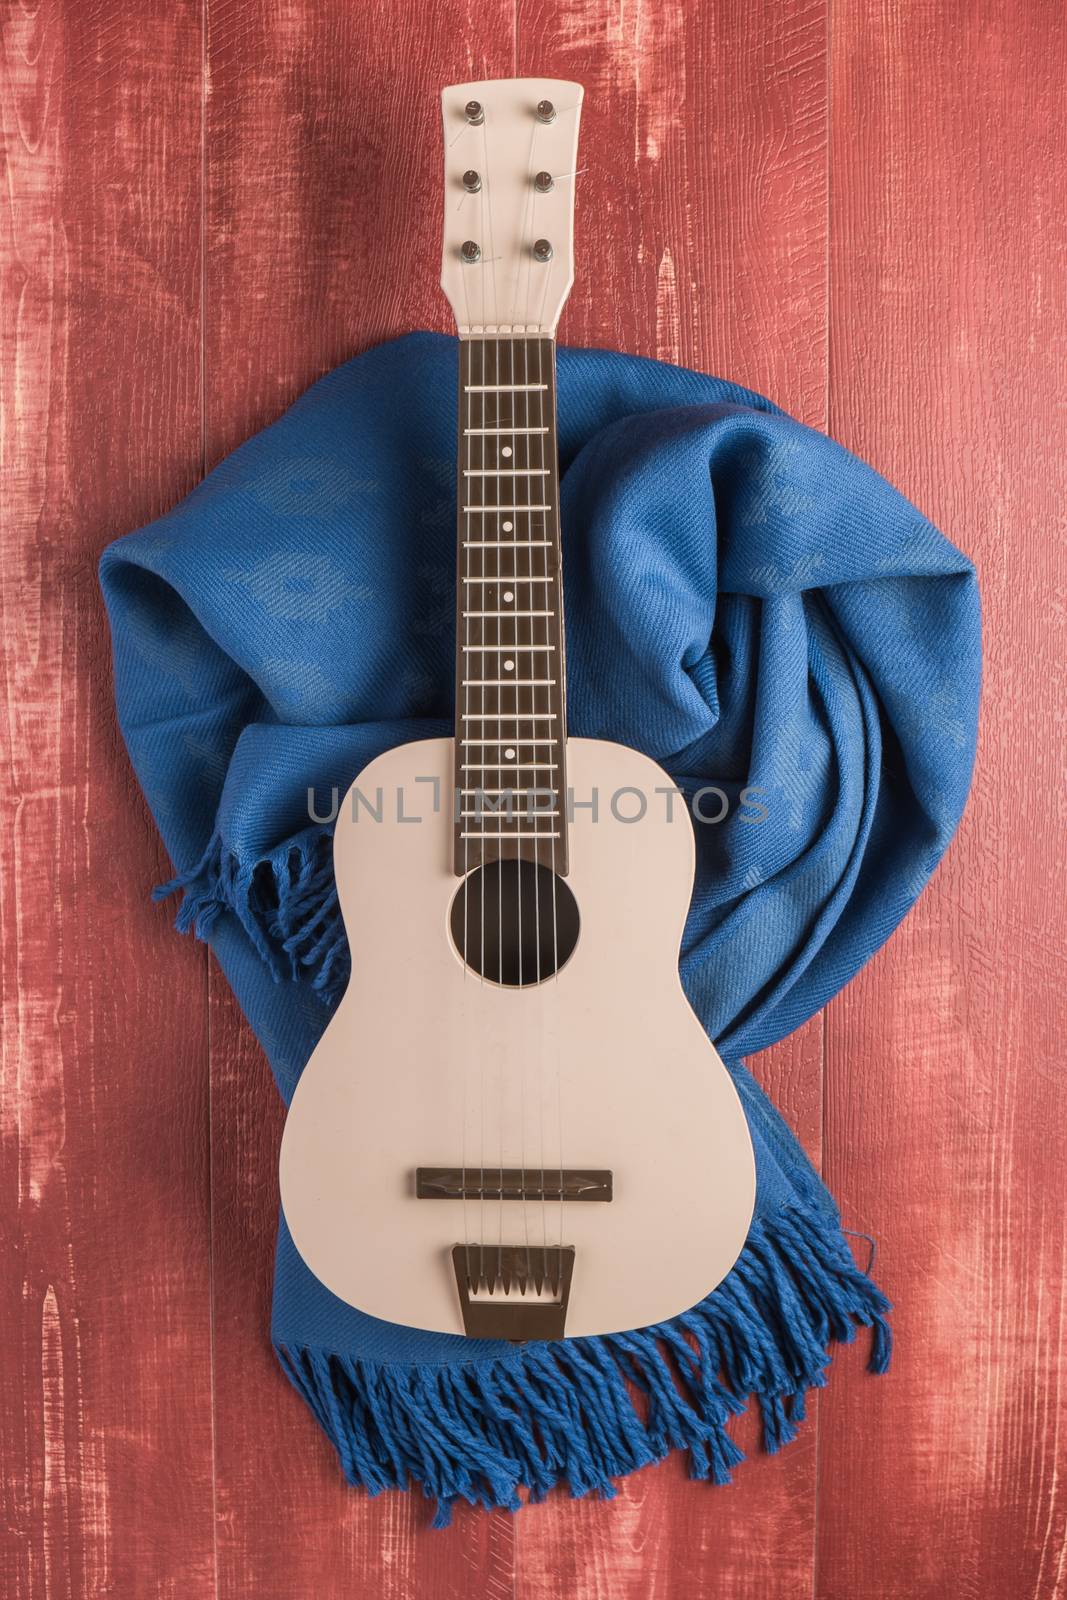 Guitar and blanket on rustic wooden background texture. Top view with copy space